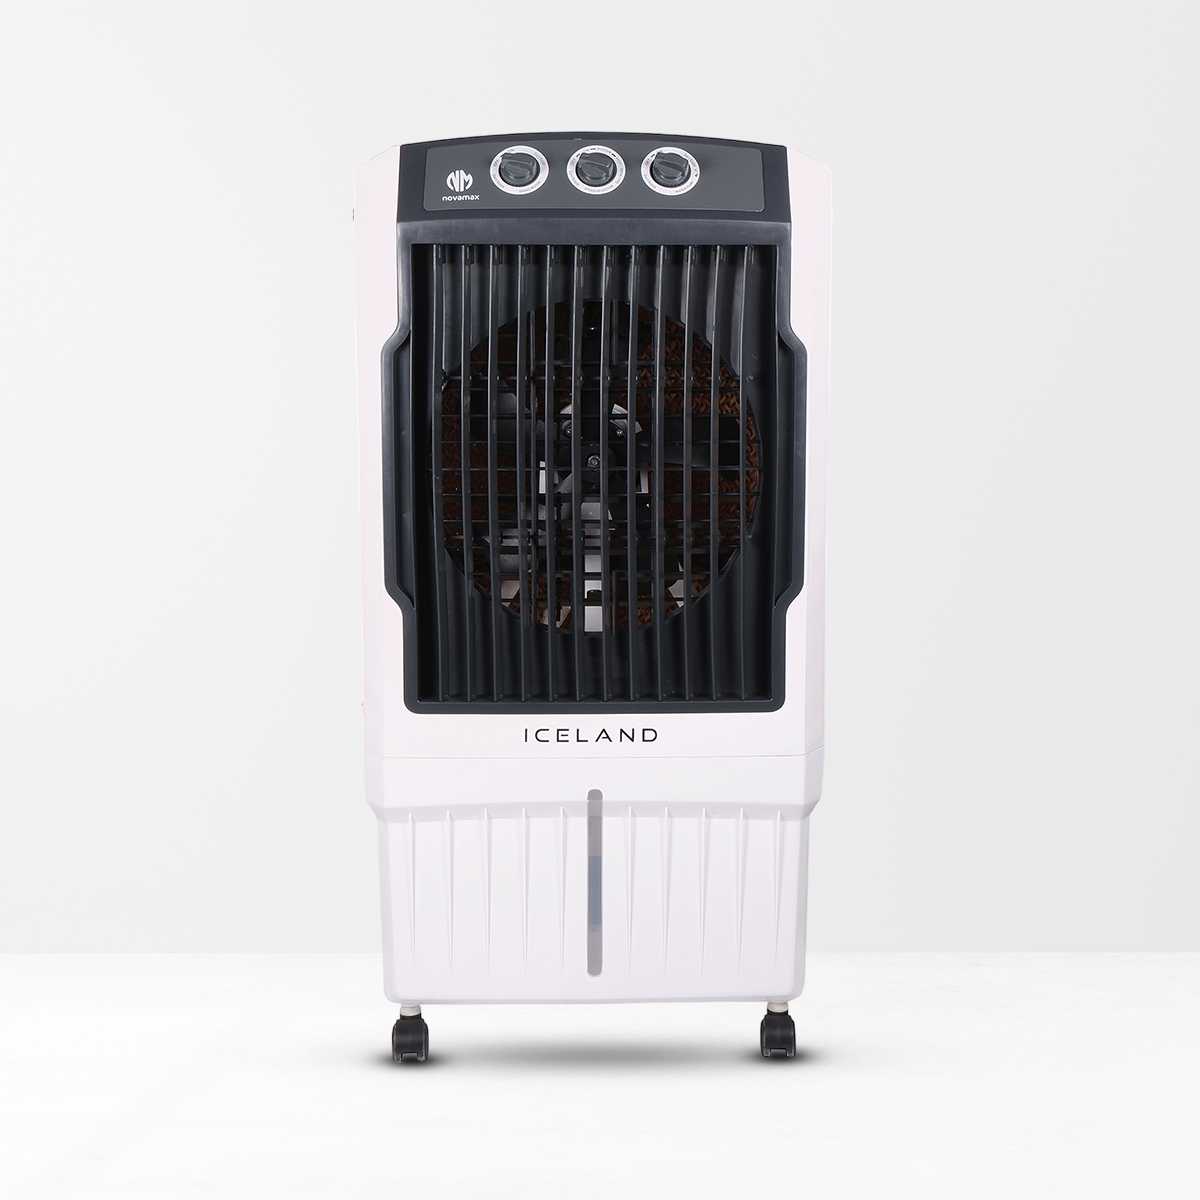 Novamax Iceland 95 L Desert Air Cooler with Ice Chamber, 3-Side Honeycomb Cooling Pads, Powerful Air Throw, 4-Way Air Deflection and Low Power Consumption (Black)